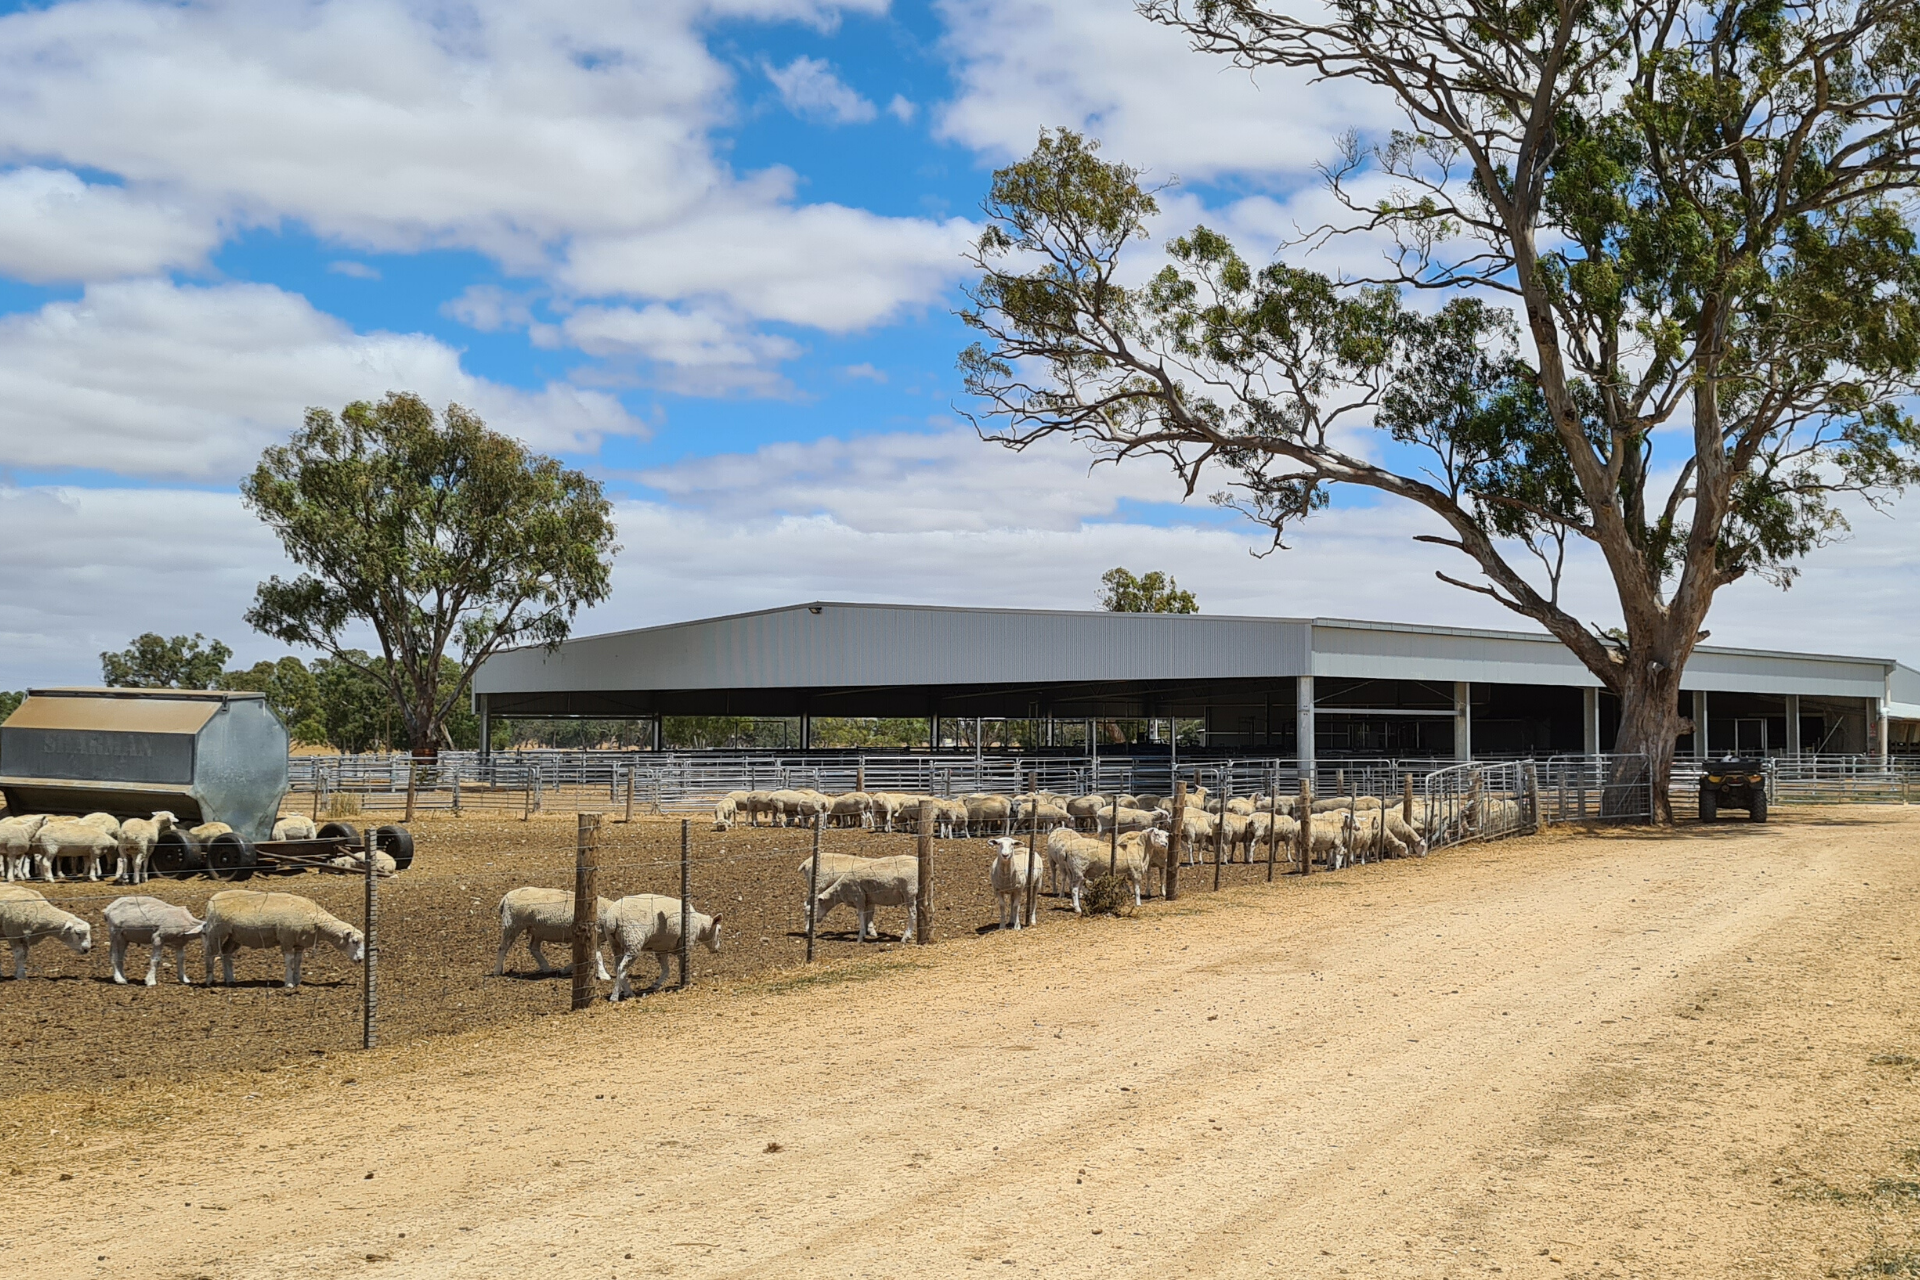 You are currently viewing 38m x 24m x 4.5m sheep yard cover